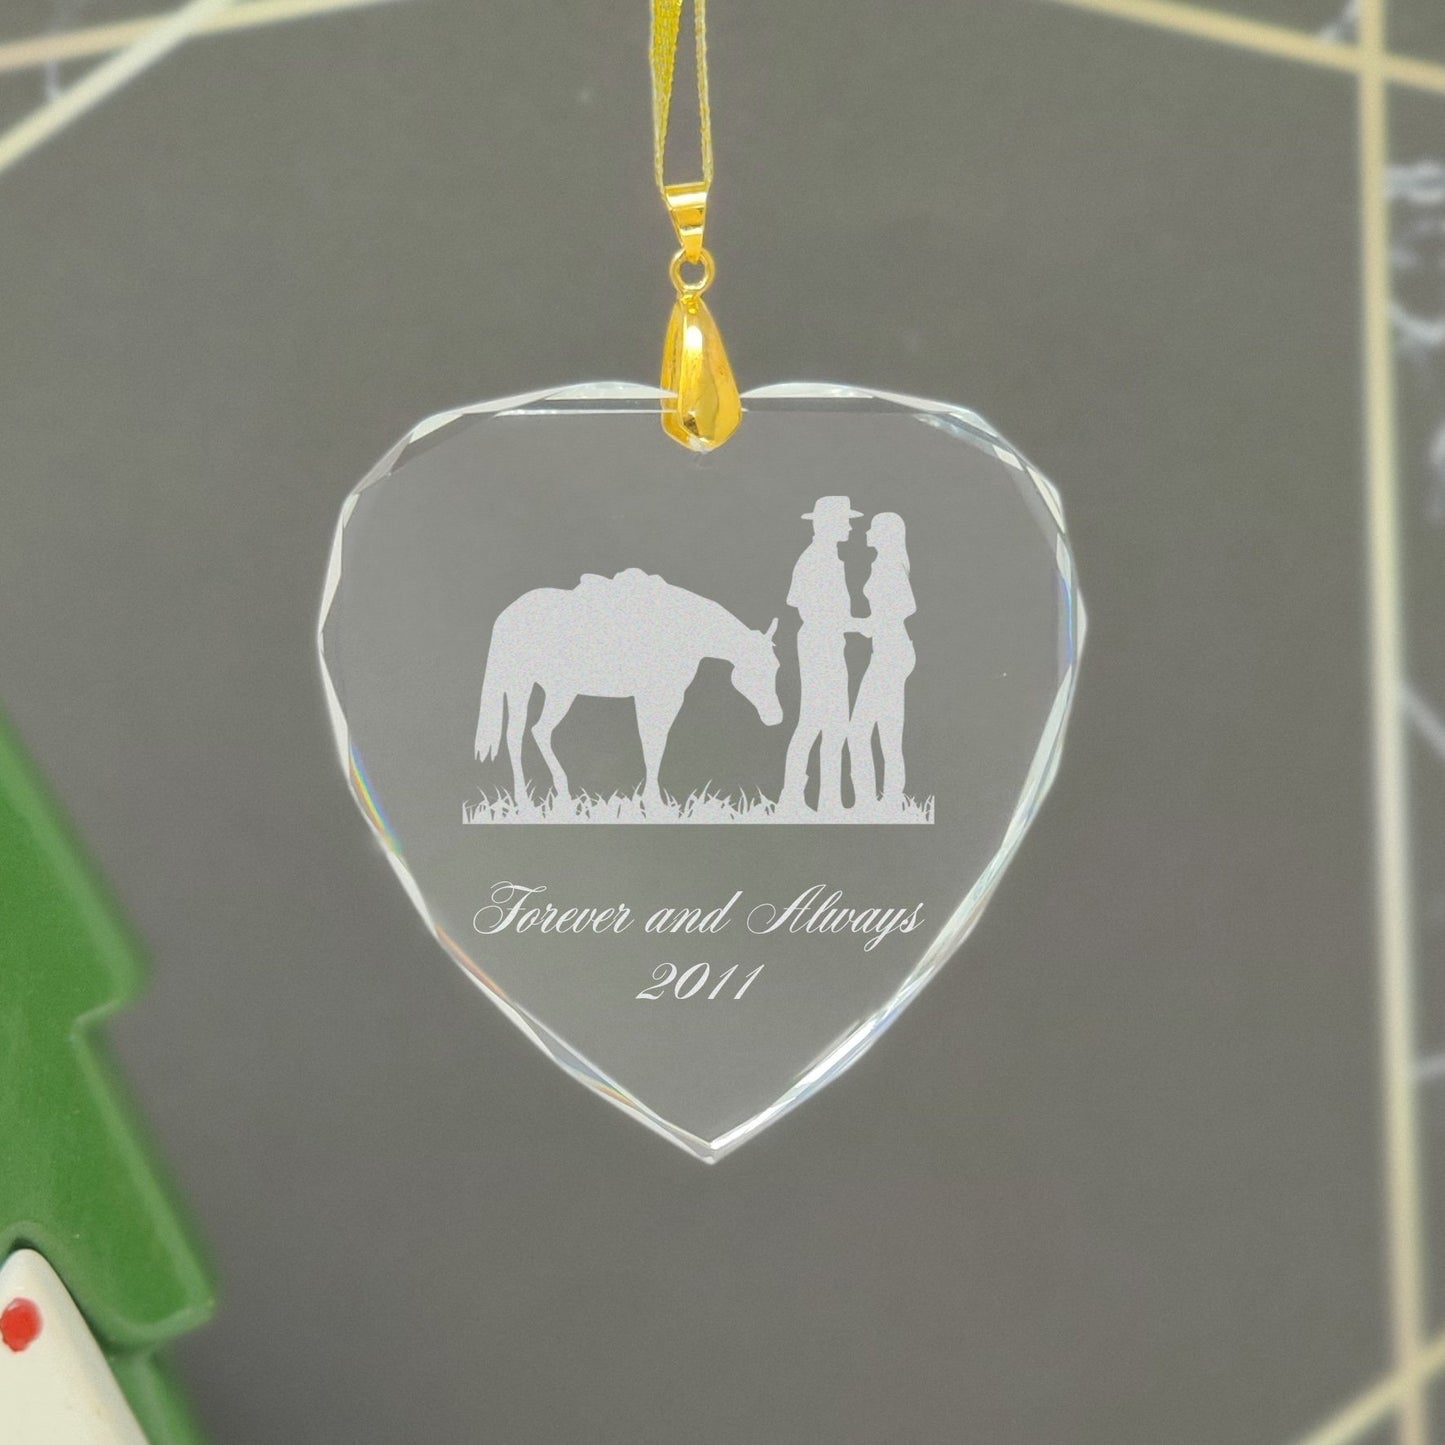 LaserGram Christmas Ornament, Trout Fish, Personalized Engraving Included (Heart Shape)